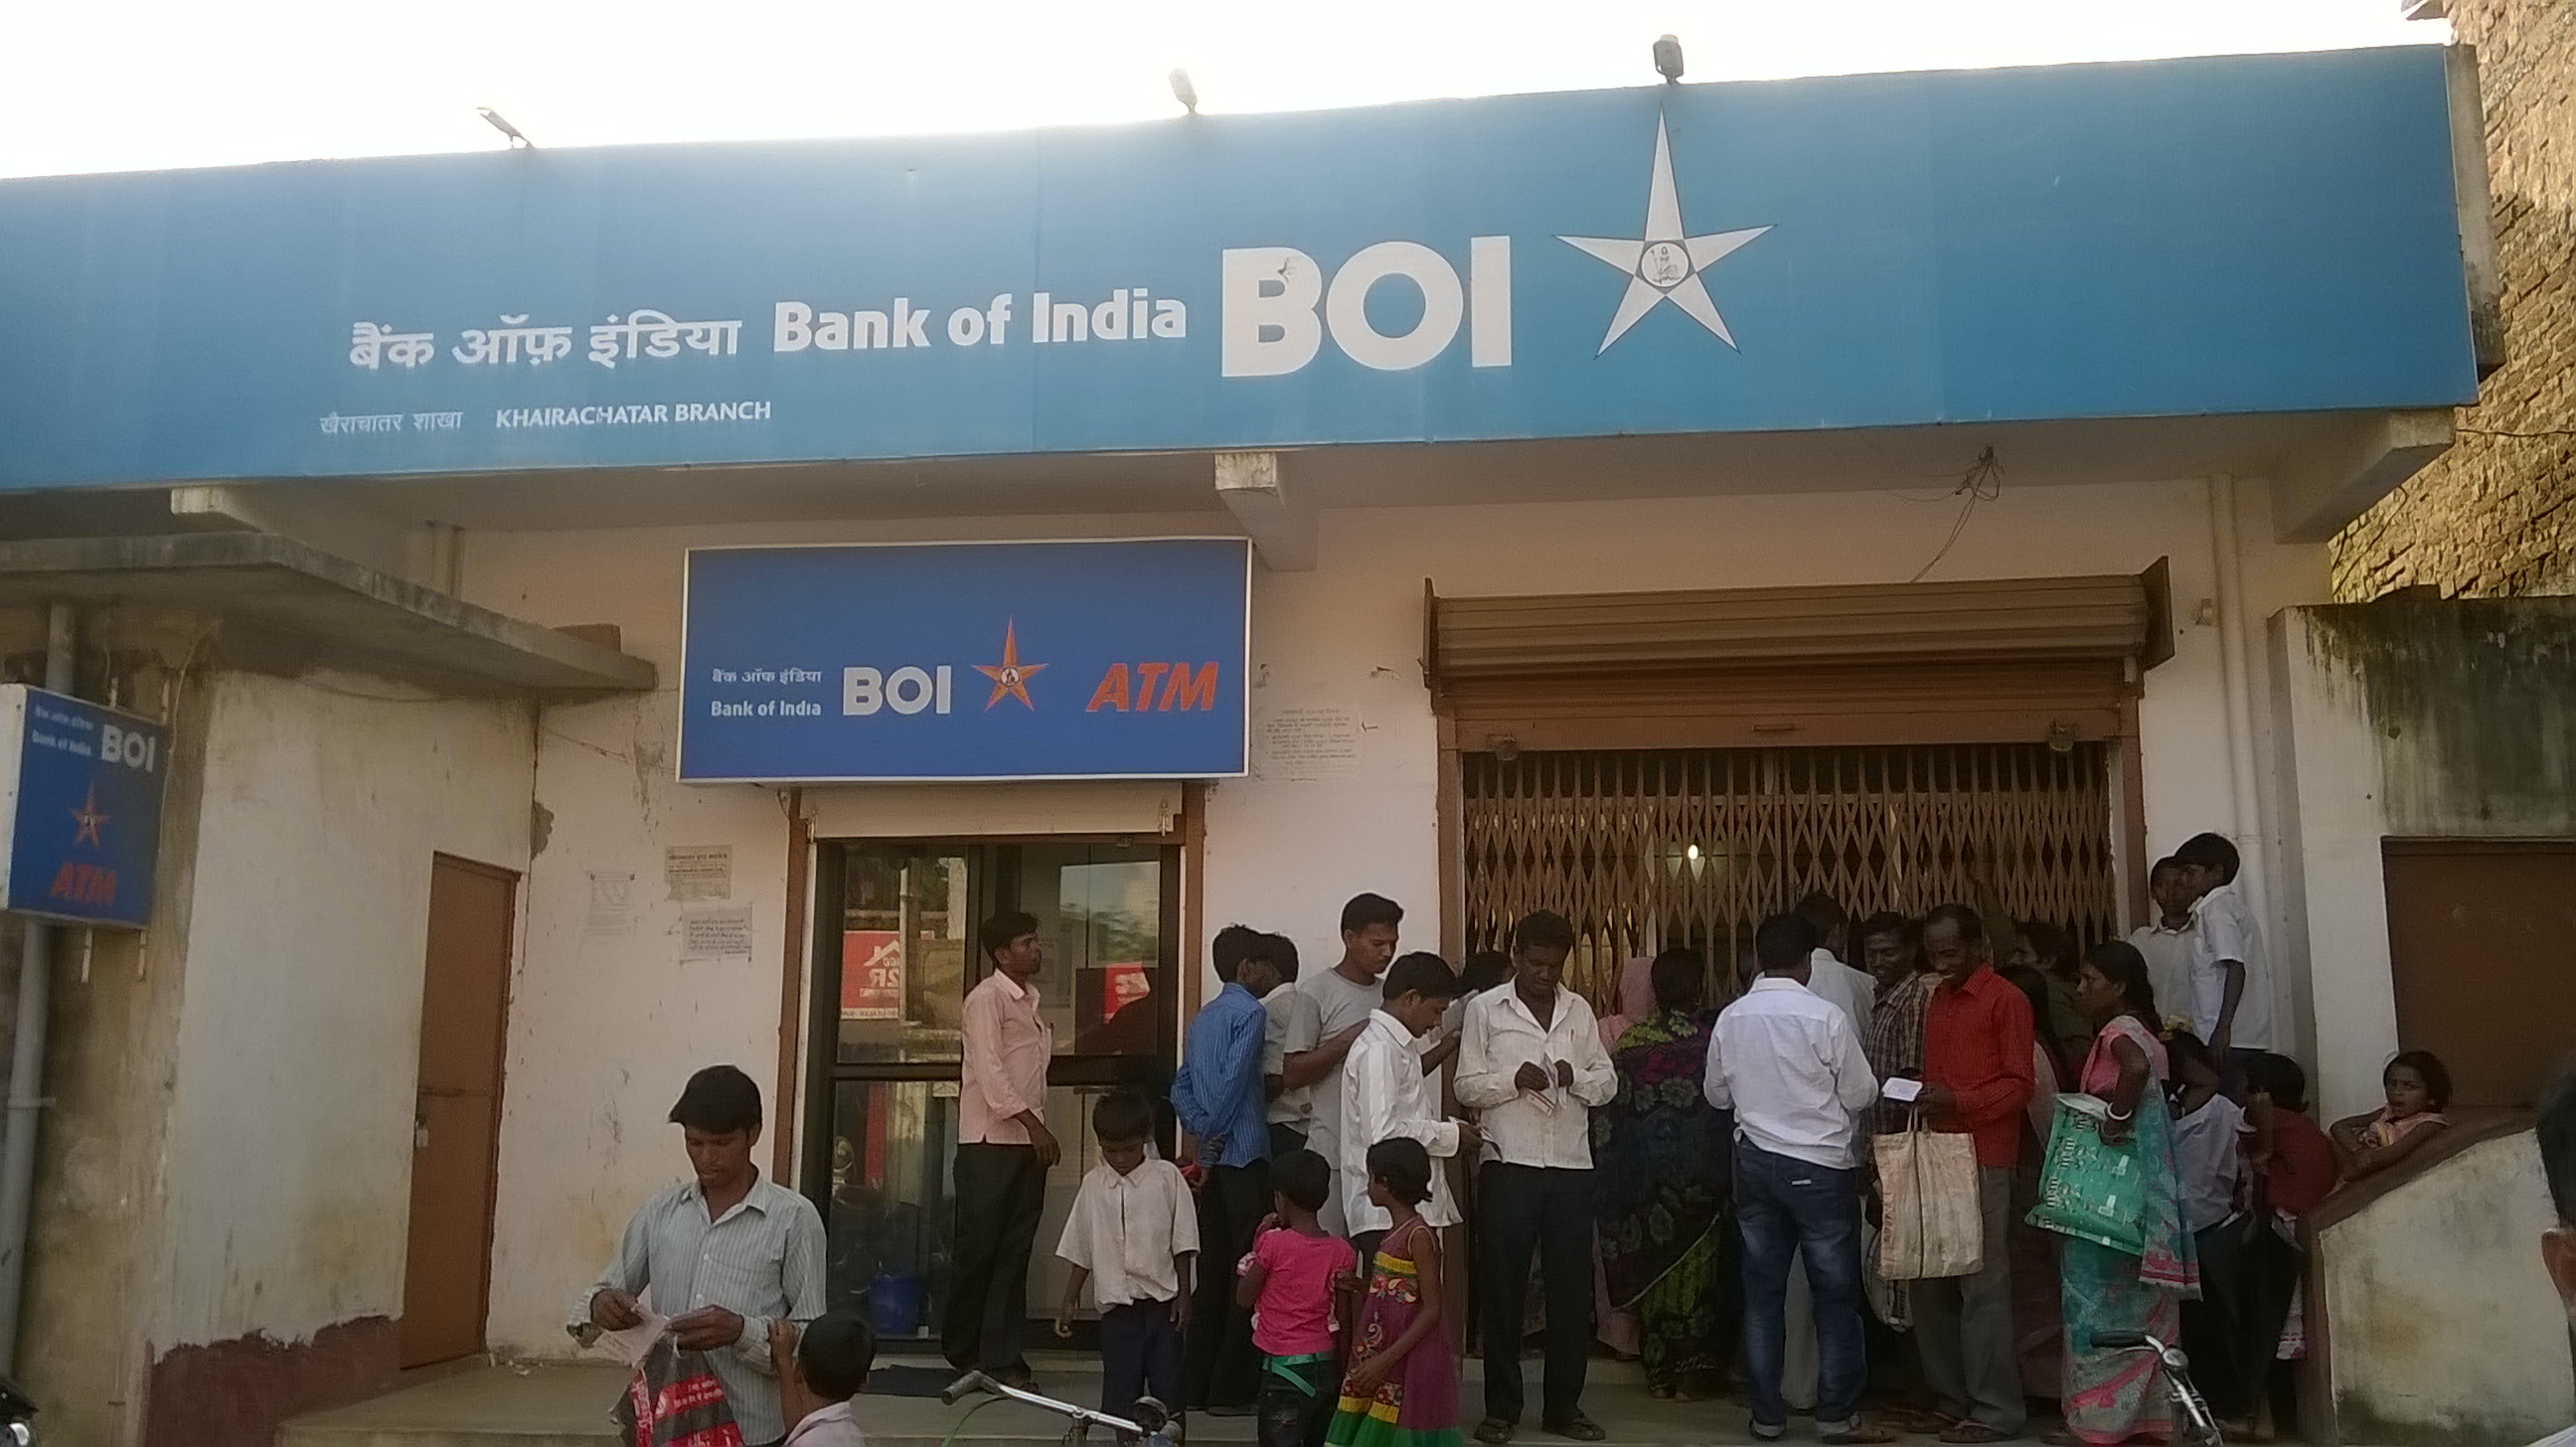 Bank of India to raise Rs 400-500 cr from sale of non-core asset